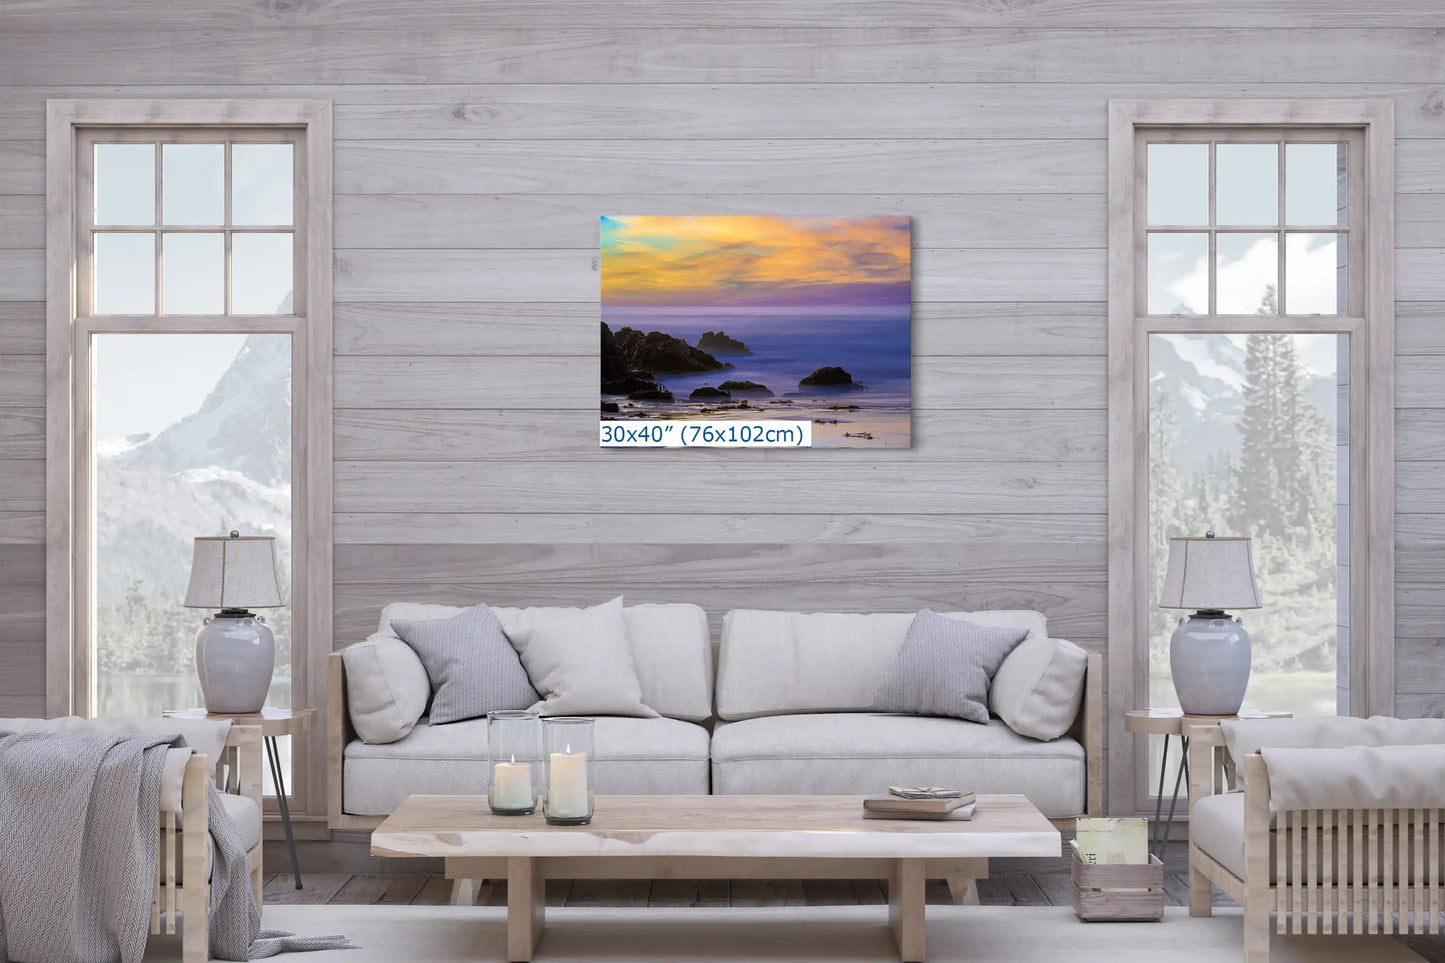 Large 30x40 wall art in a living room setting, showcasing the stunning sunset over Purple Sand Beach in Big Sur, creating a focal point of natural splendor.